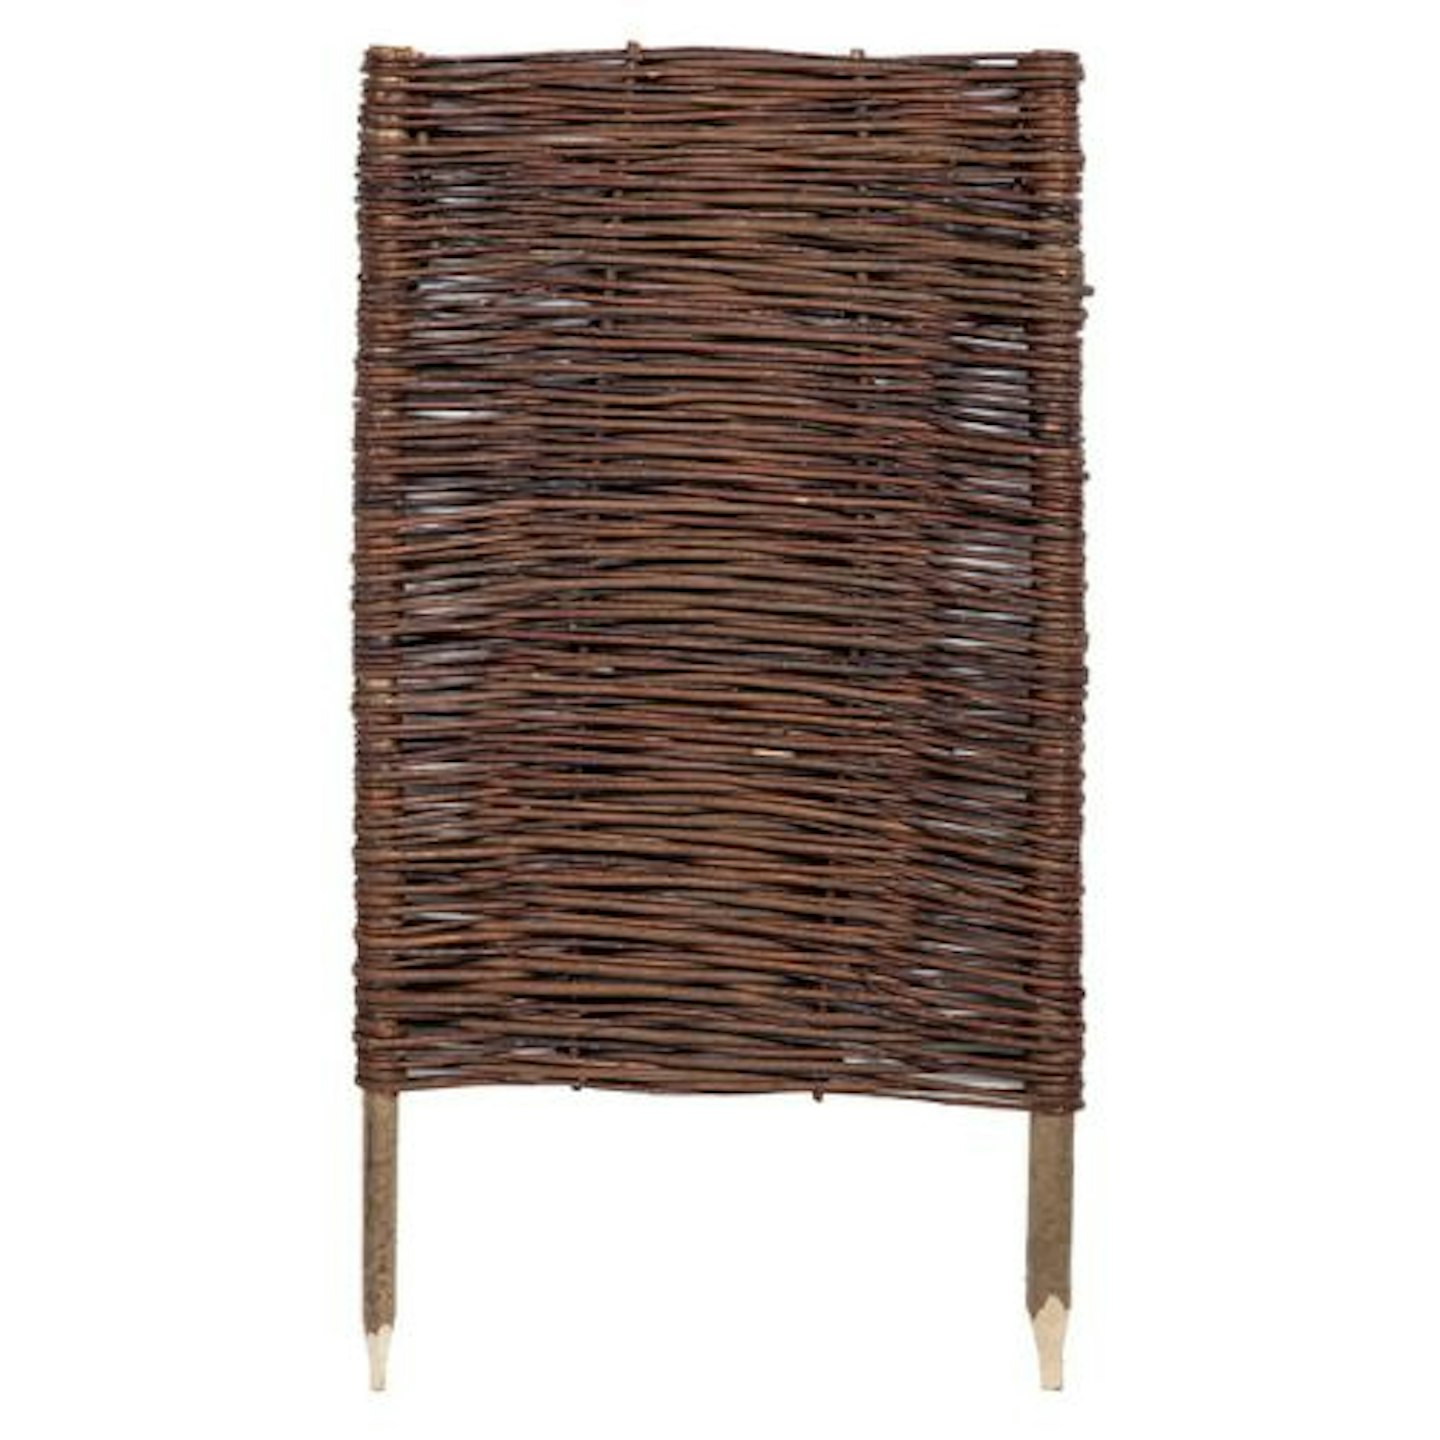 Handwoven Willow Wicker Hurdle Fence Panels